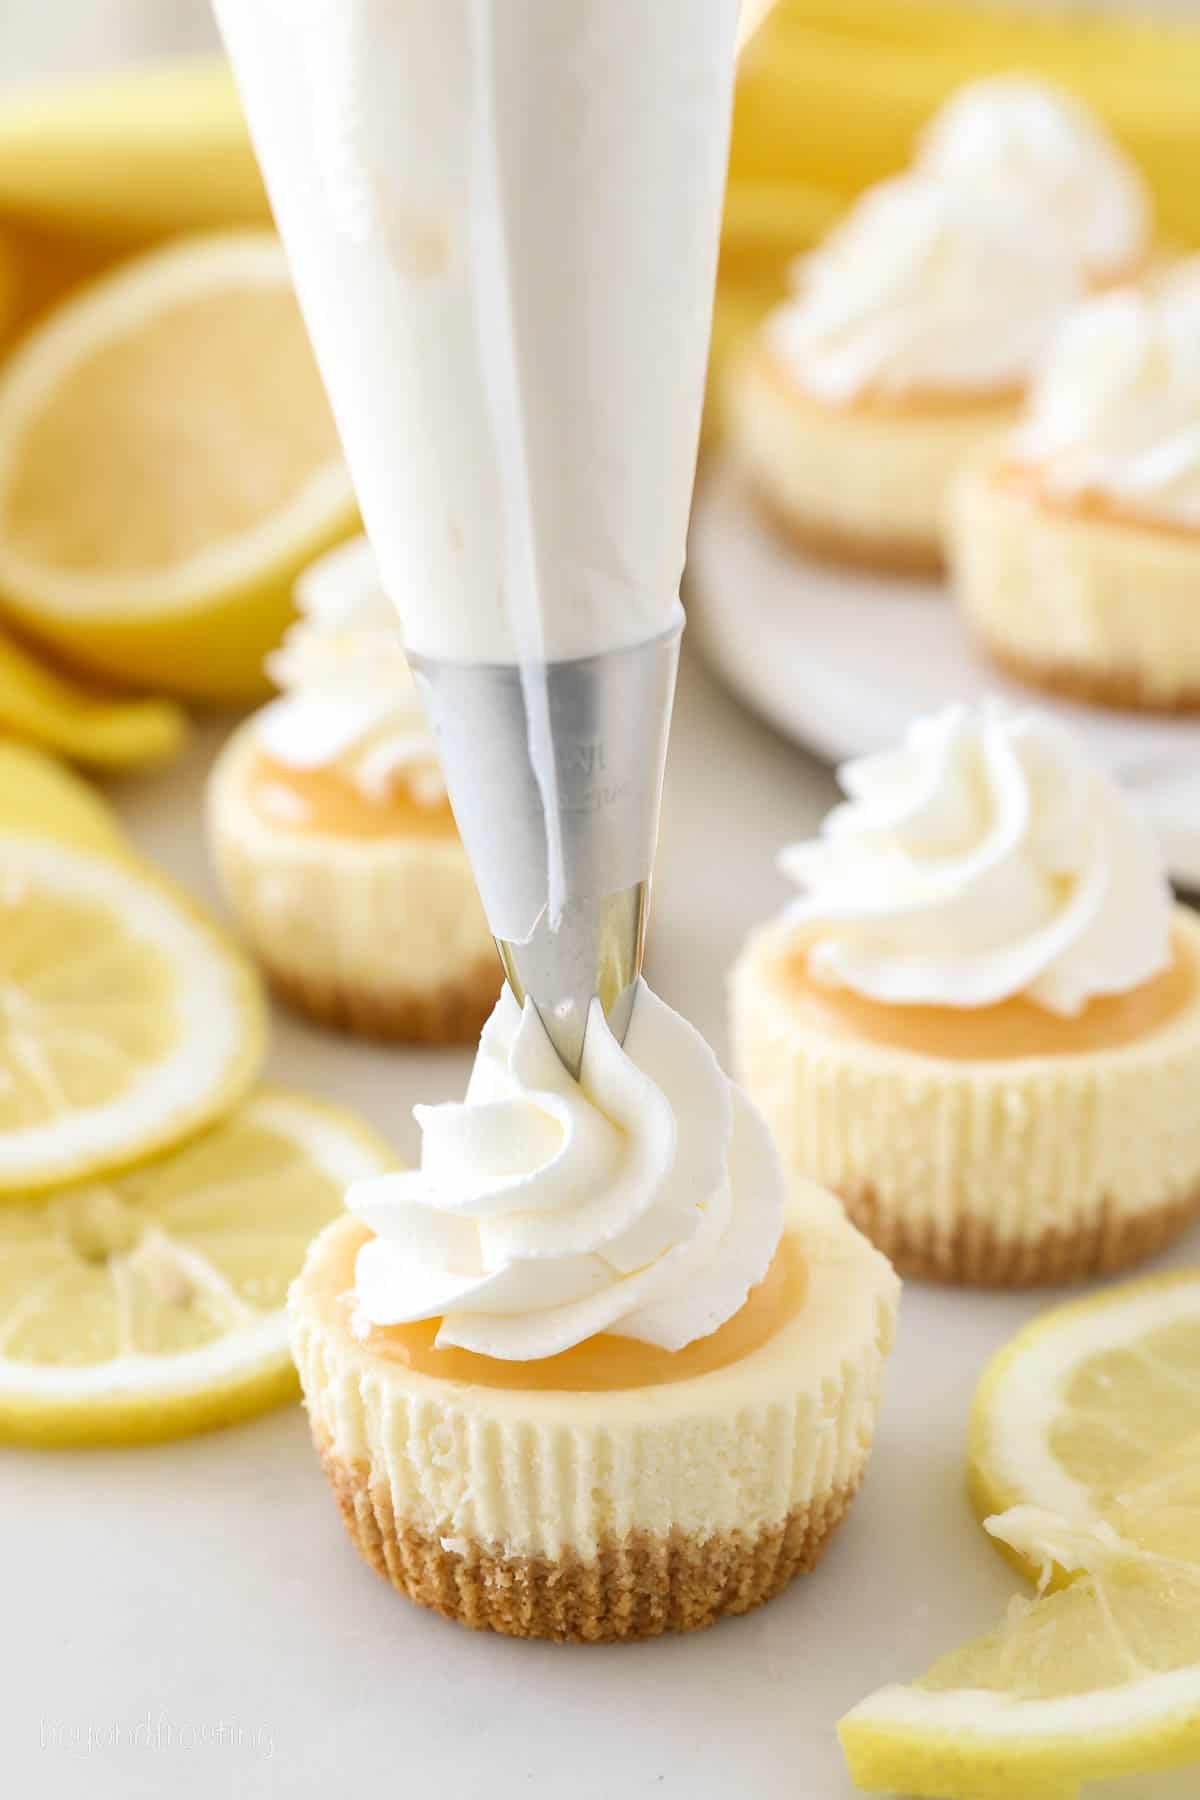 A piping bag pipes a swirl of whipped cream over top of a mini lemon cheesecake topped with lemon curd.